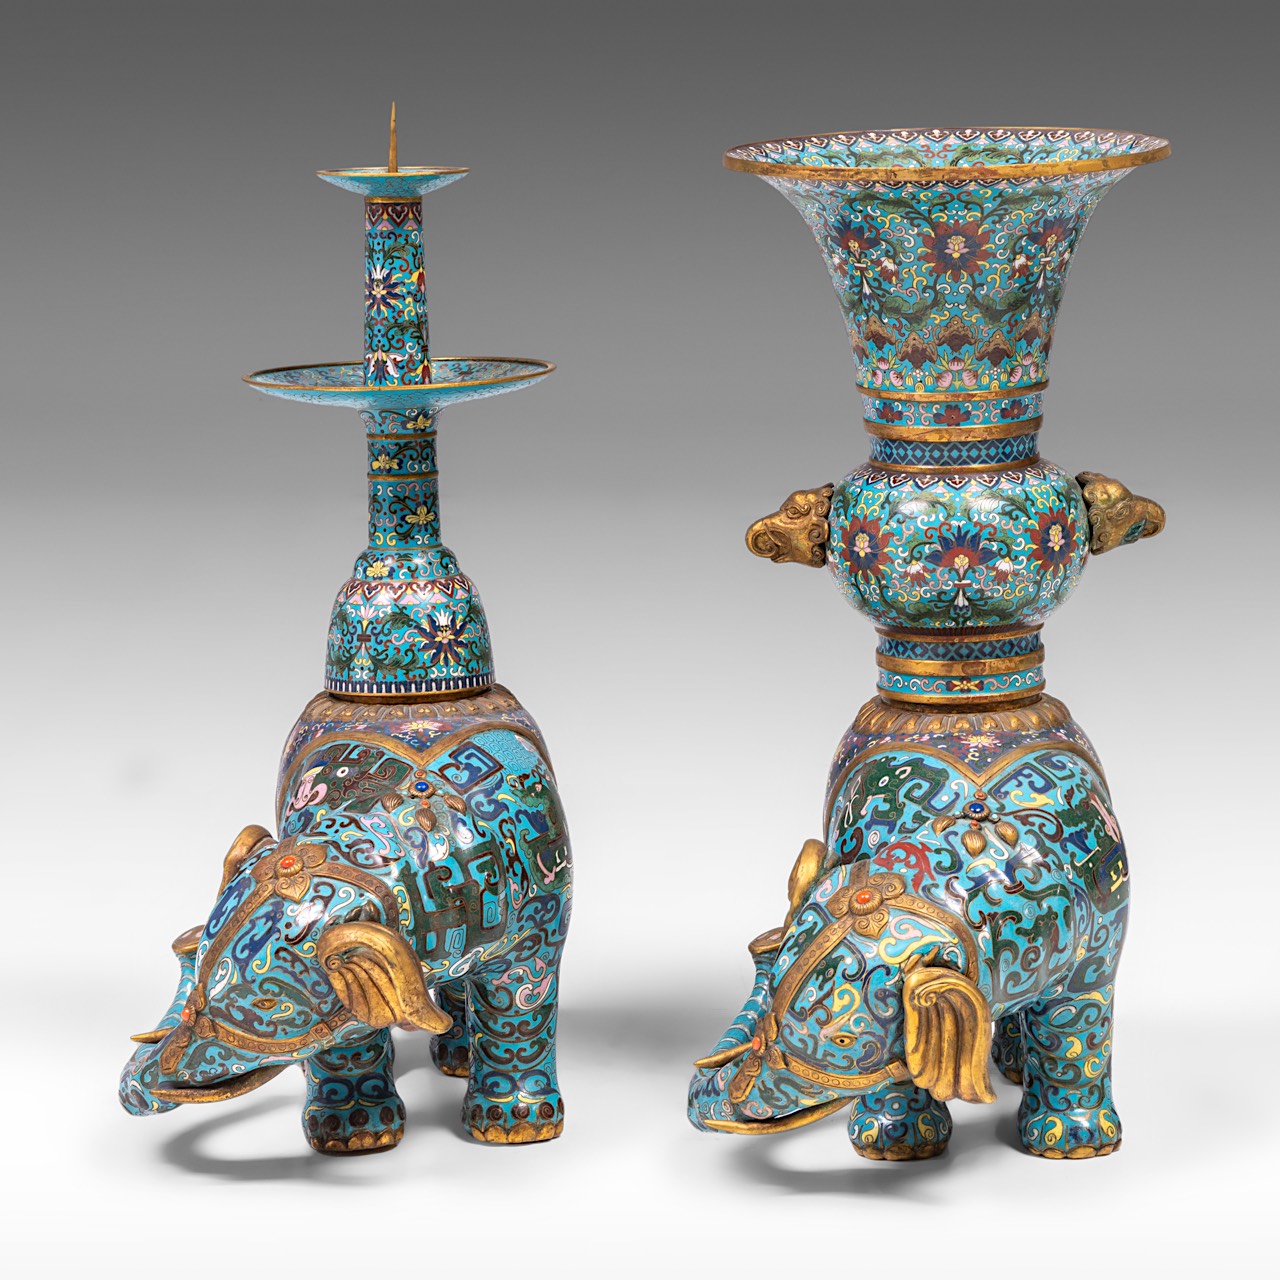 A Chinese five-piece semi-precious stone inlaid cloisonne garniture, late Qing/20thC, tallest H 58 - - Image 13 of 24